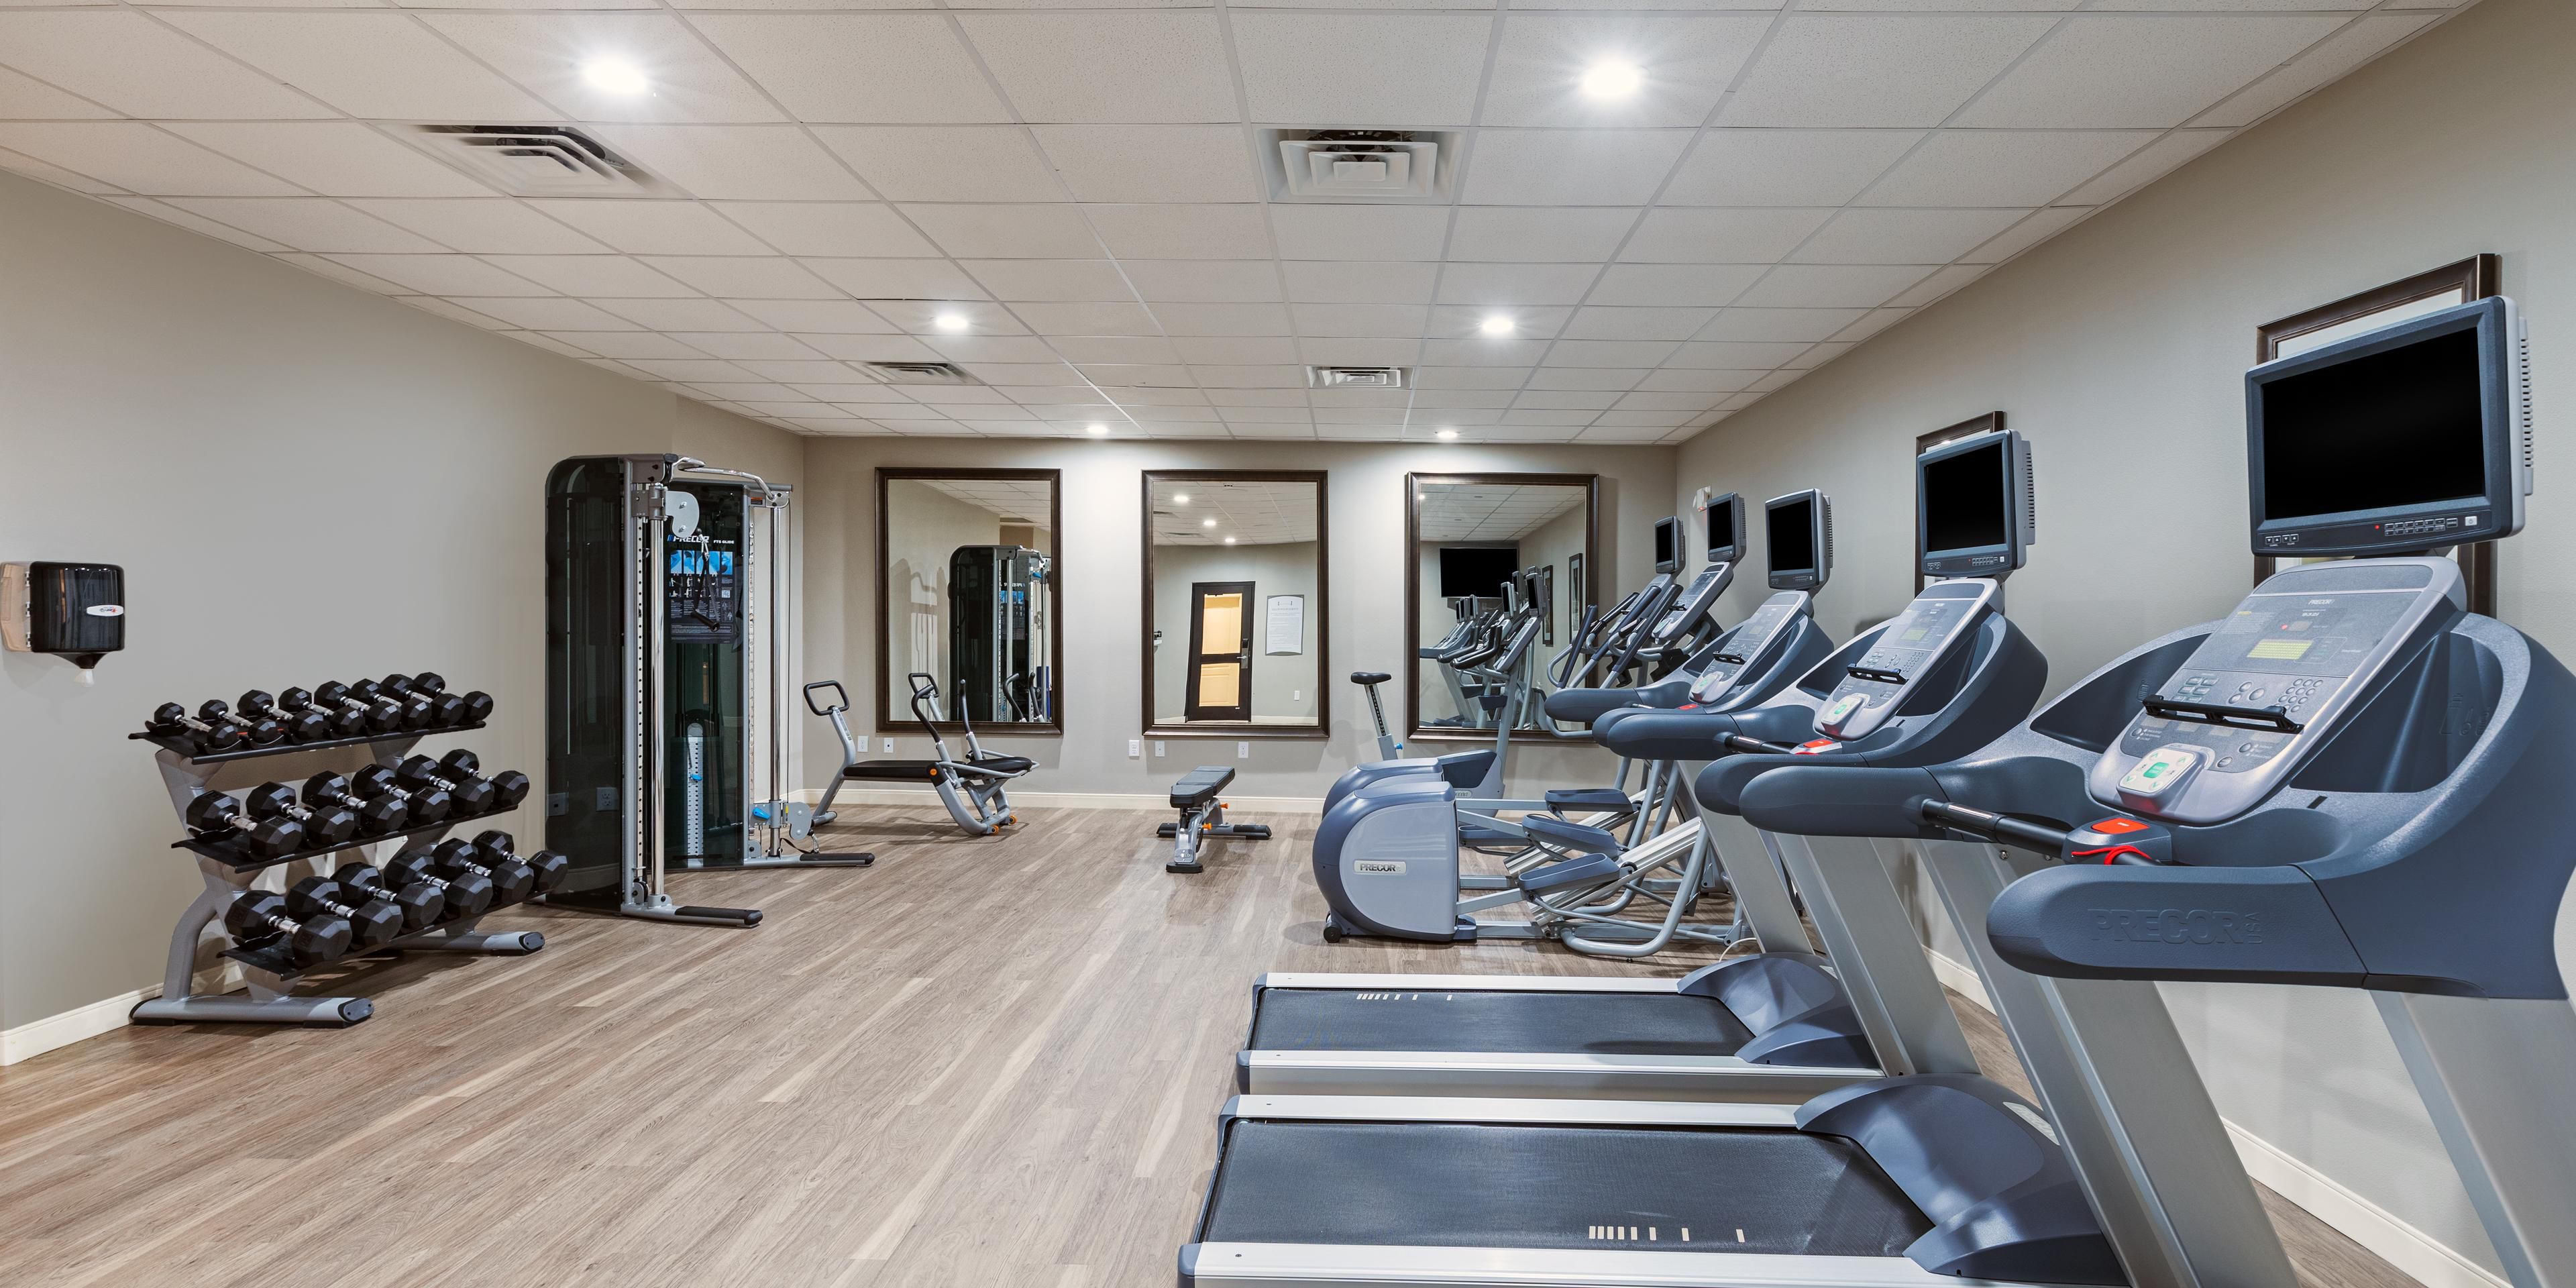 On-site Fitness Center with cardio machines and free-weights.